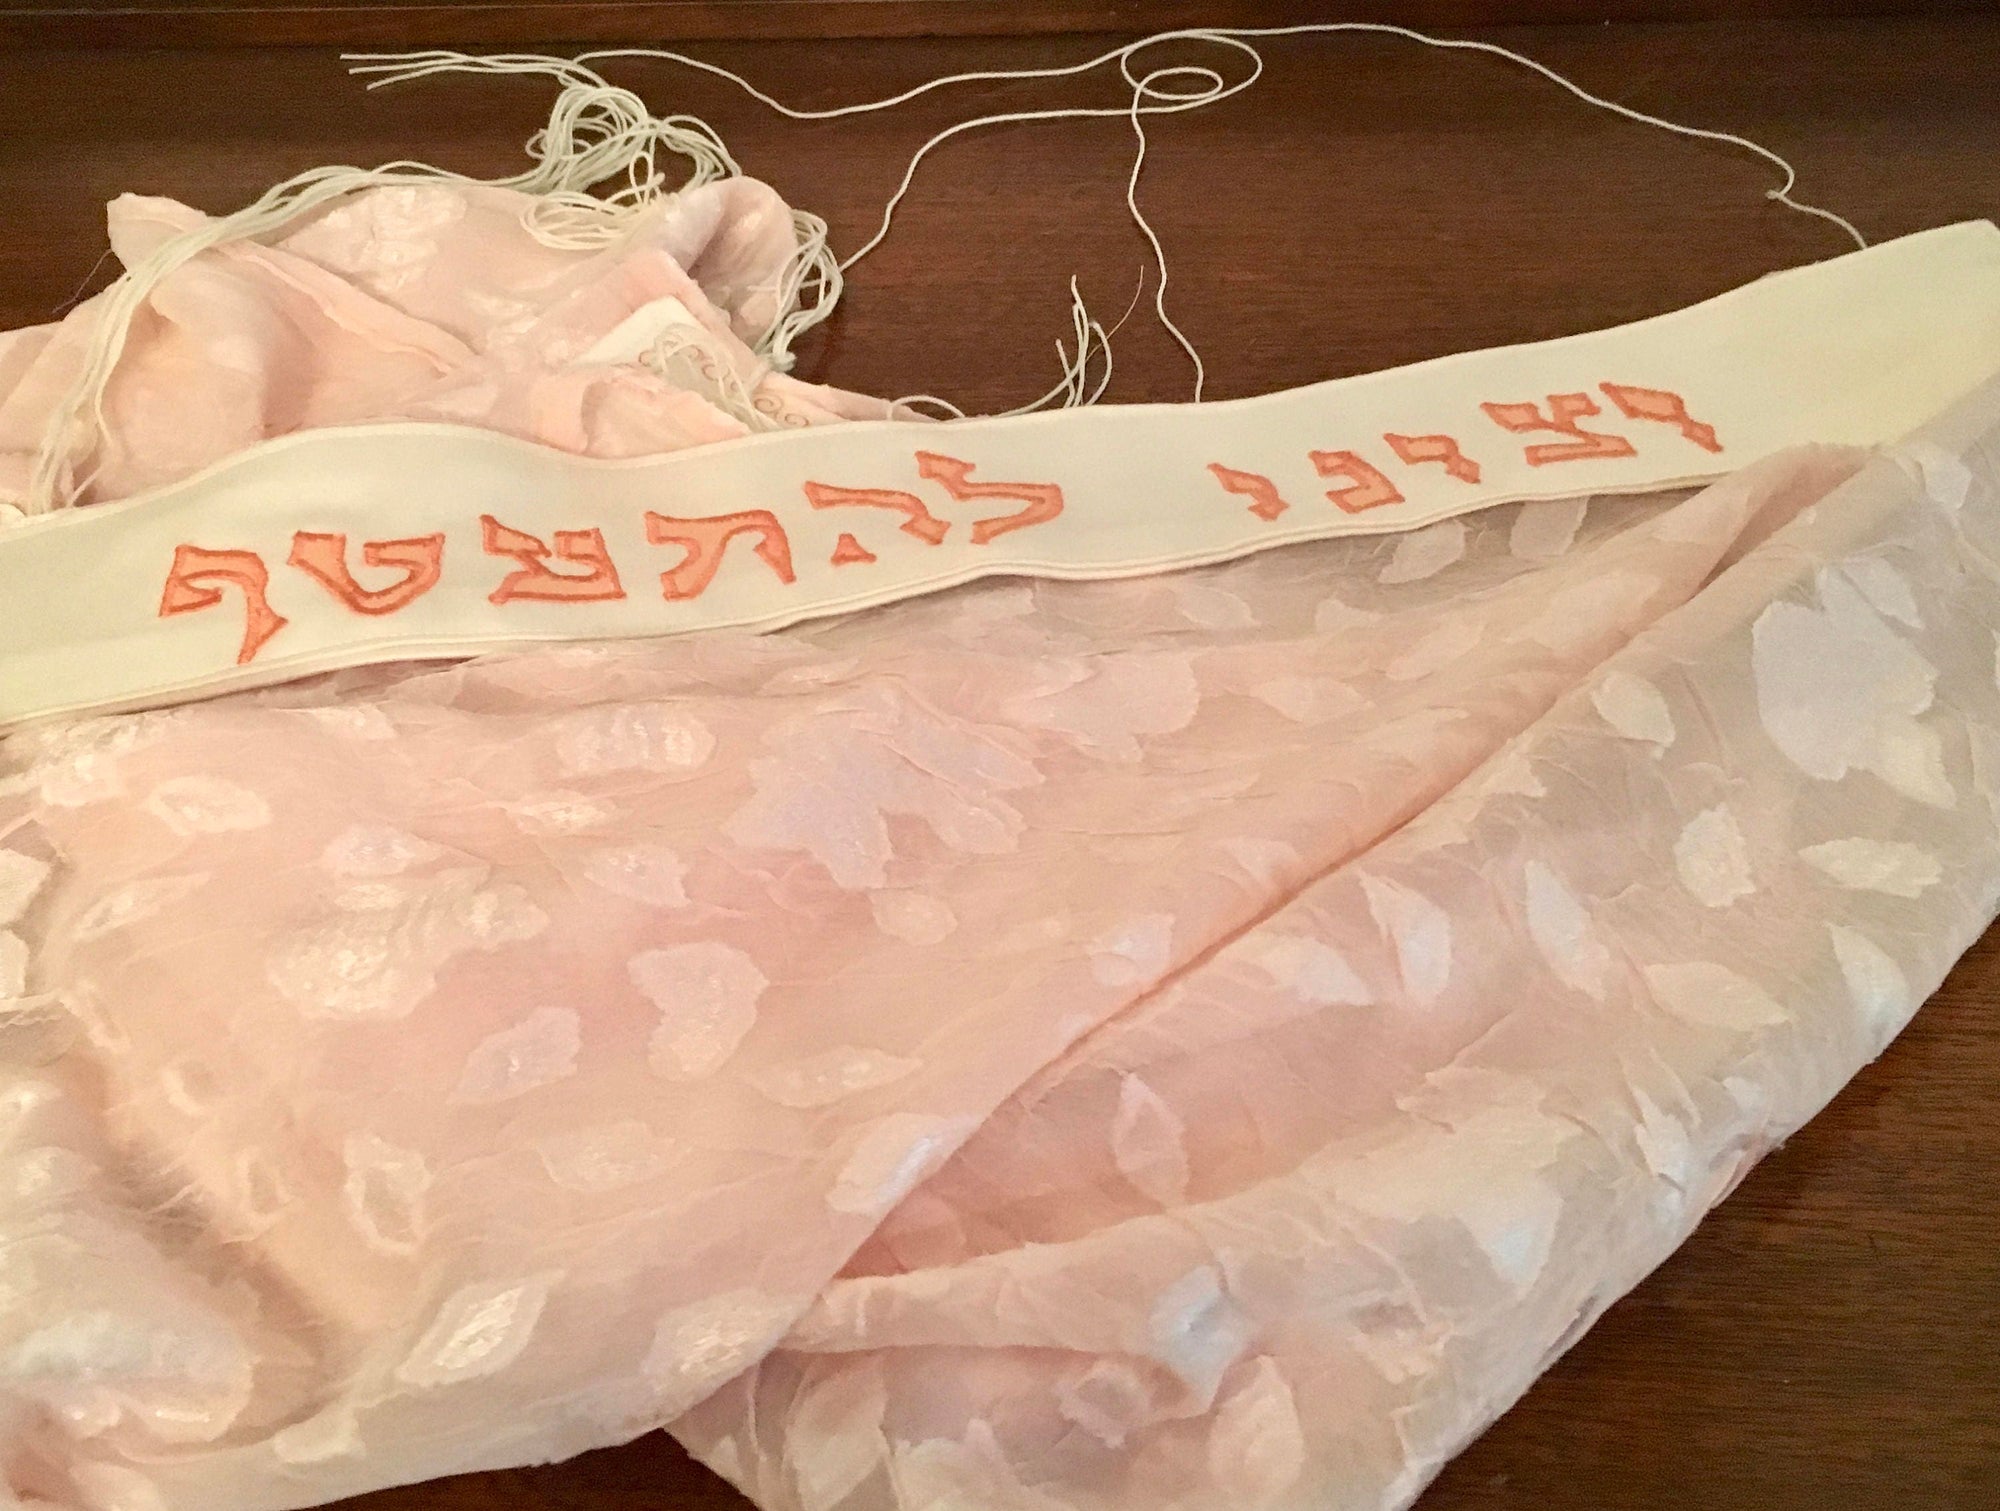 Beautiful, unique TALLIT hand made  shear peach and off white